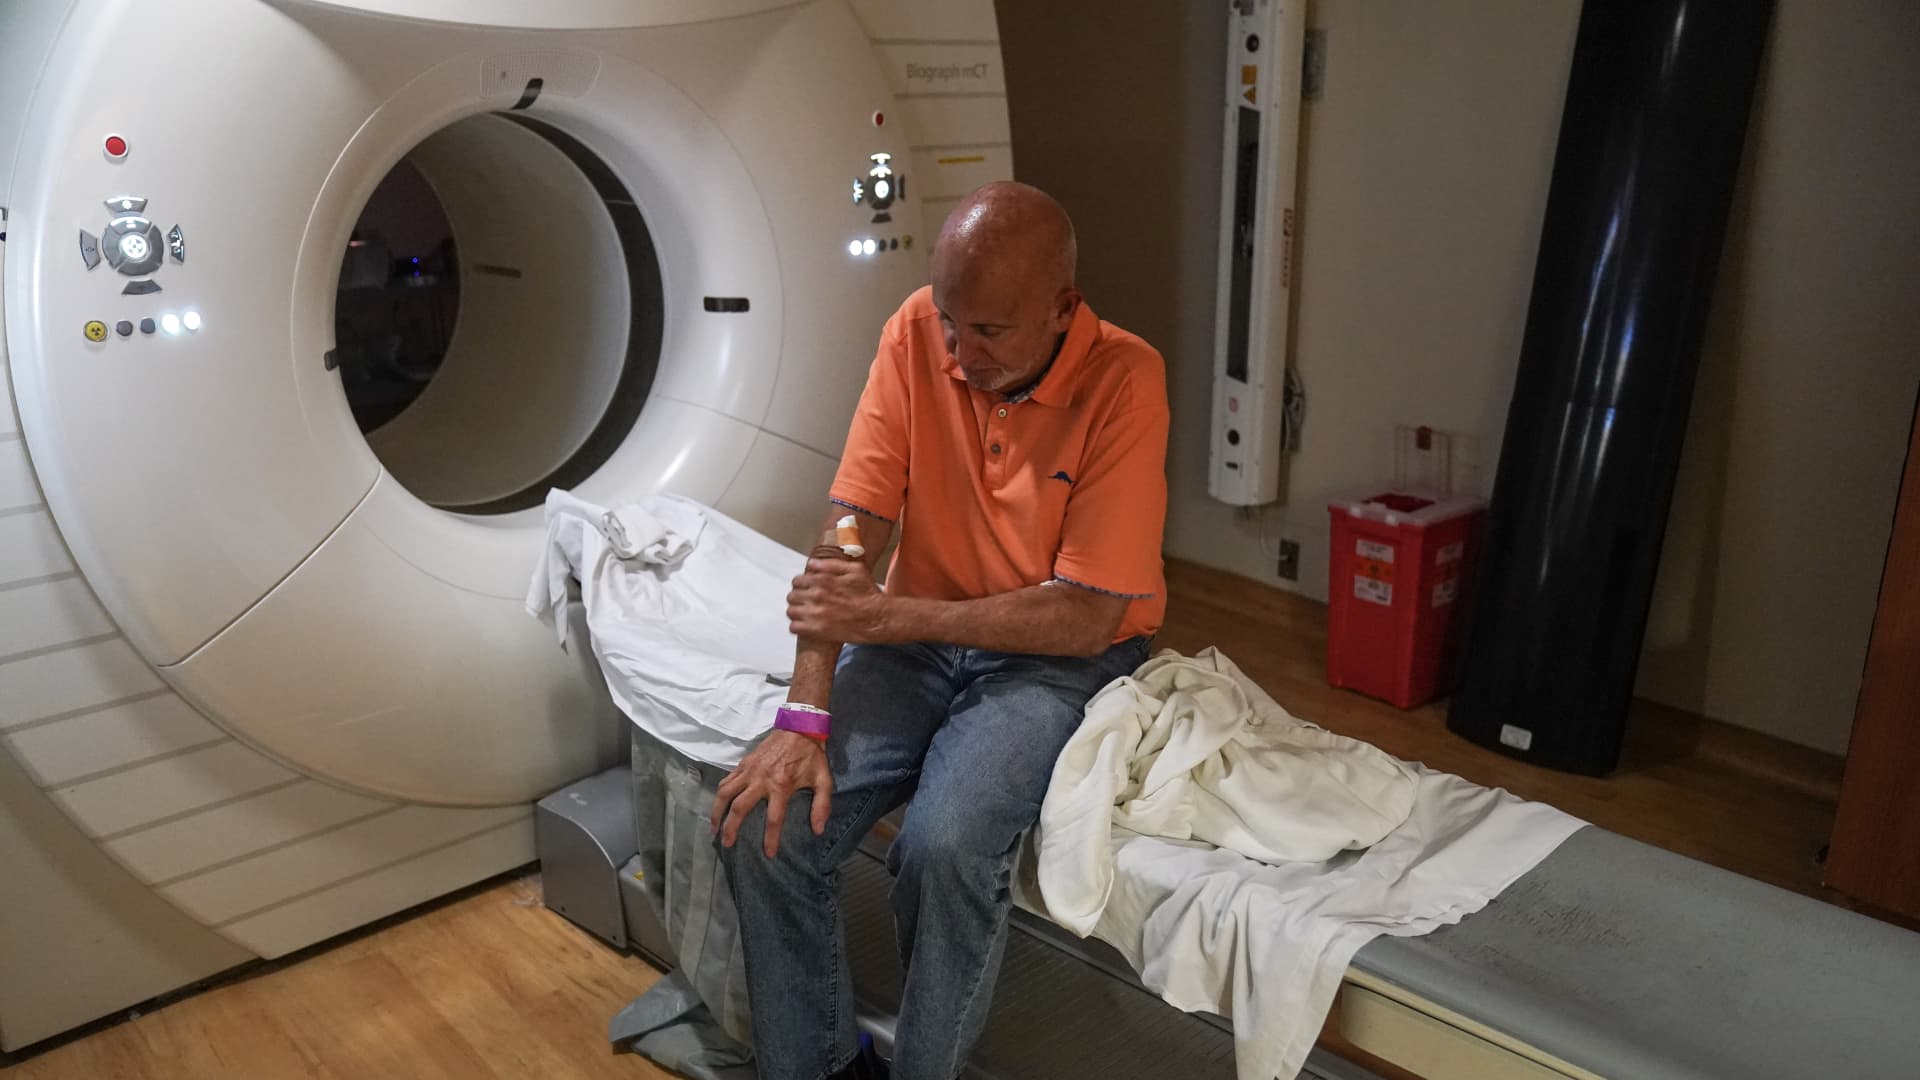 Medicare proposes removing limit on PET scans used to help diagnose Alzheimer's disease